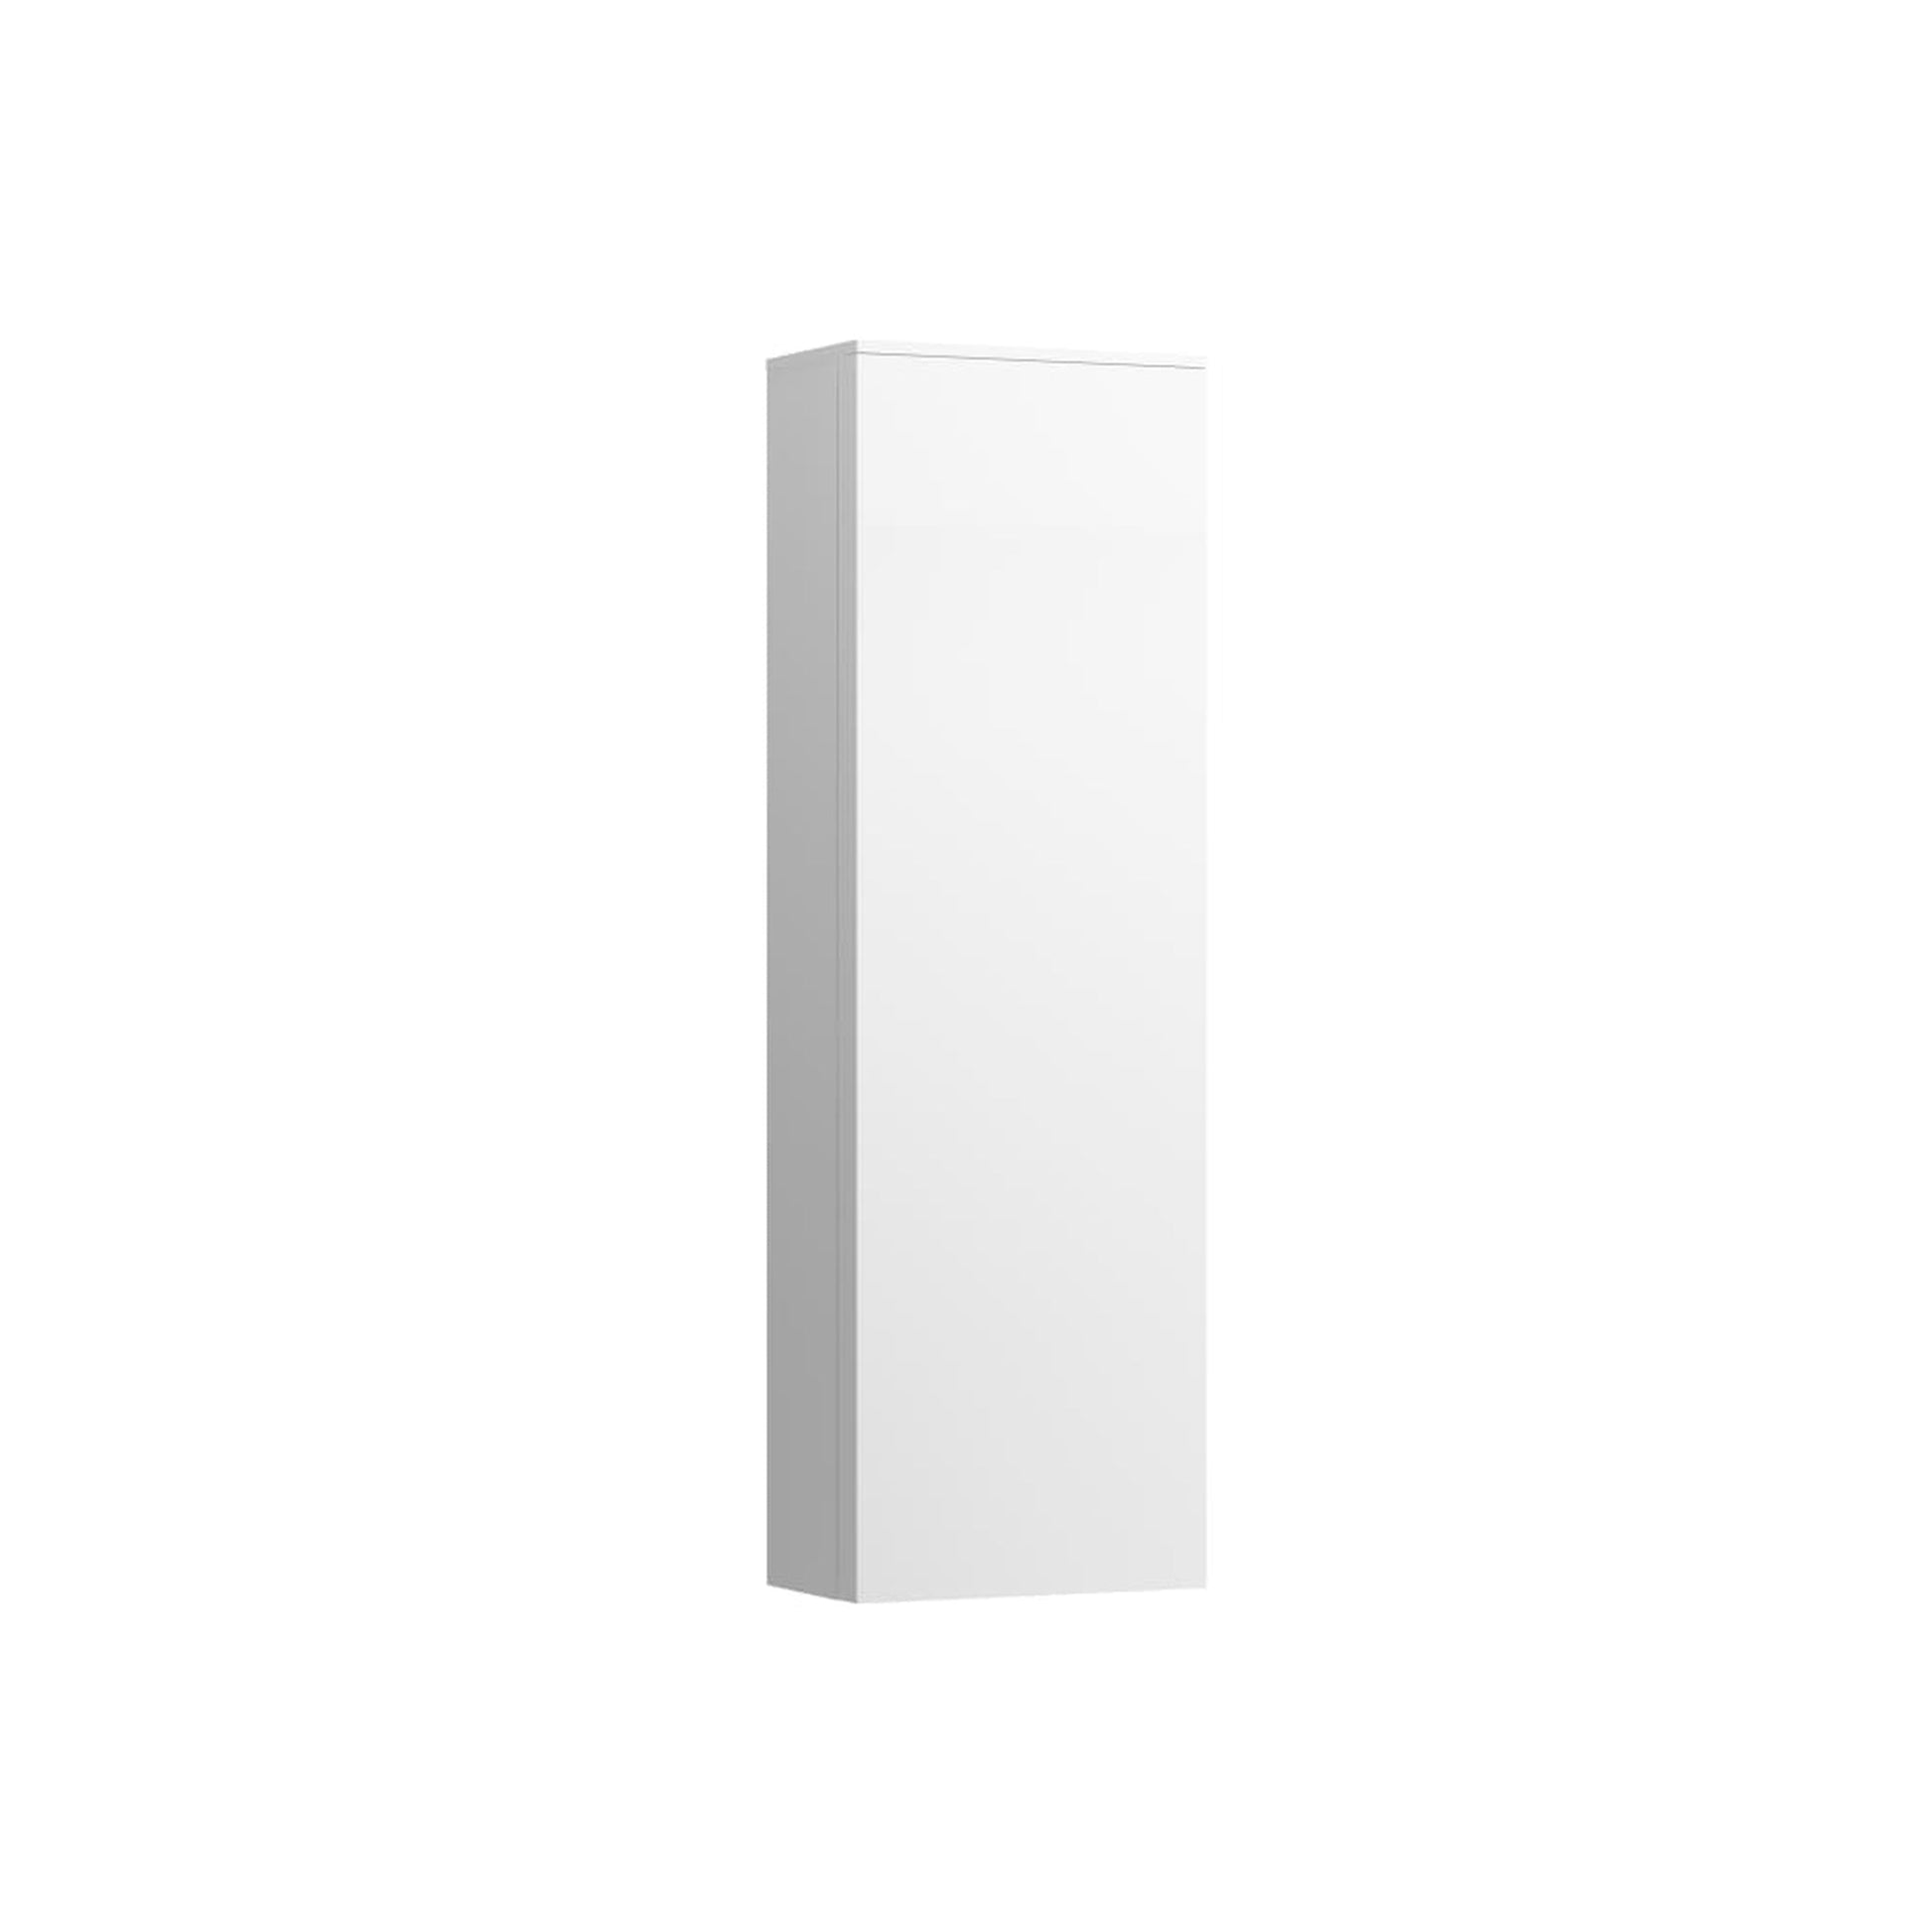 Laufen Kartell 16" x 51" 1-Door Right-Hinged White Wall-Mounted Tall Cabinet With 4 Fixed Glass Shelves